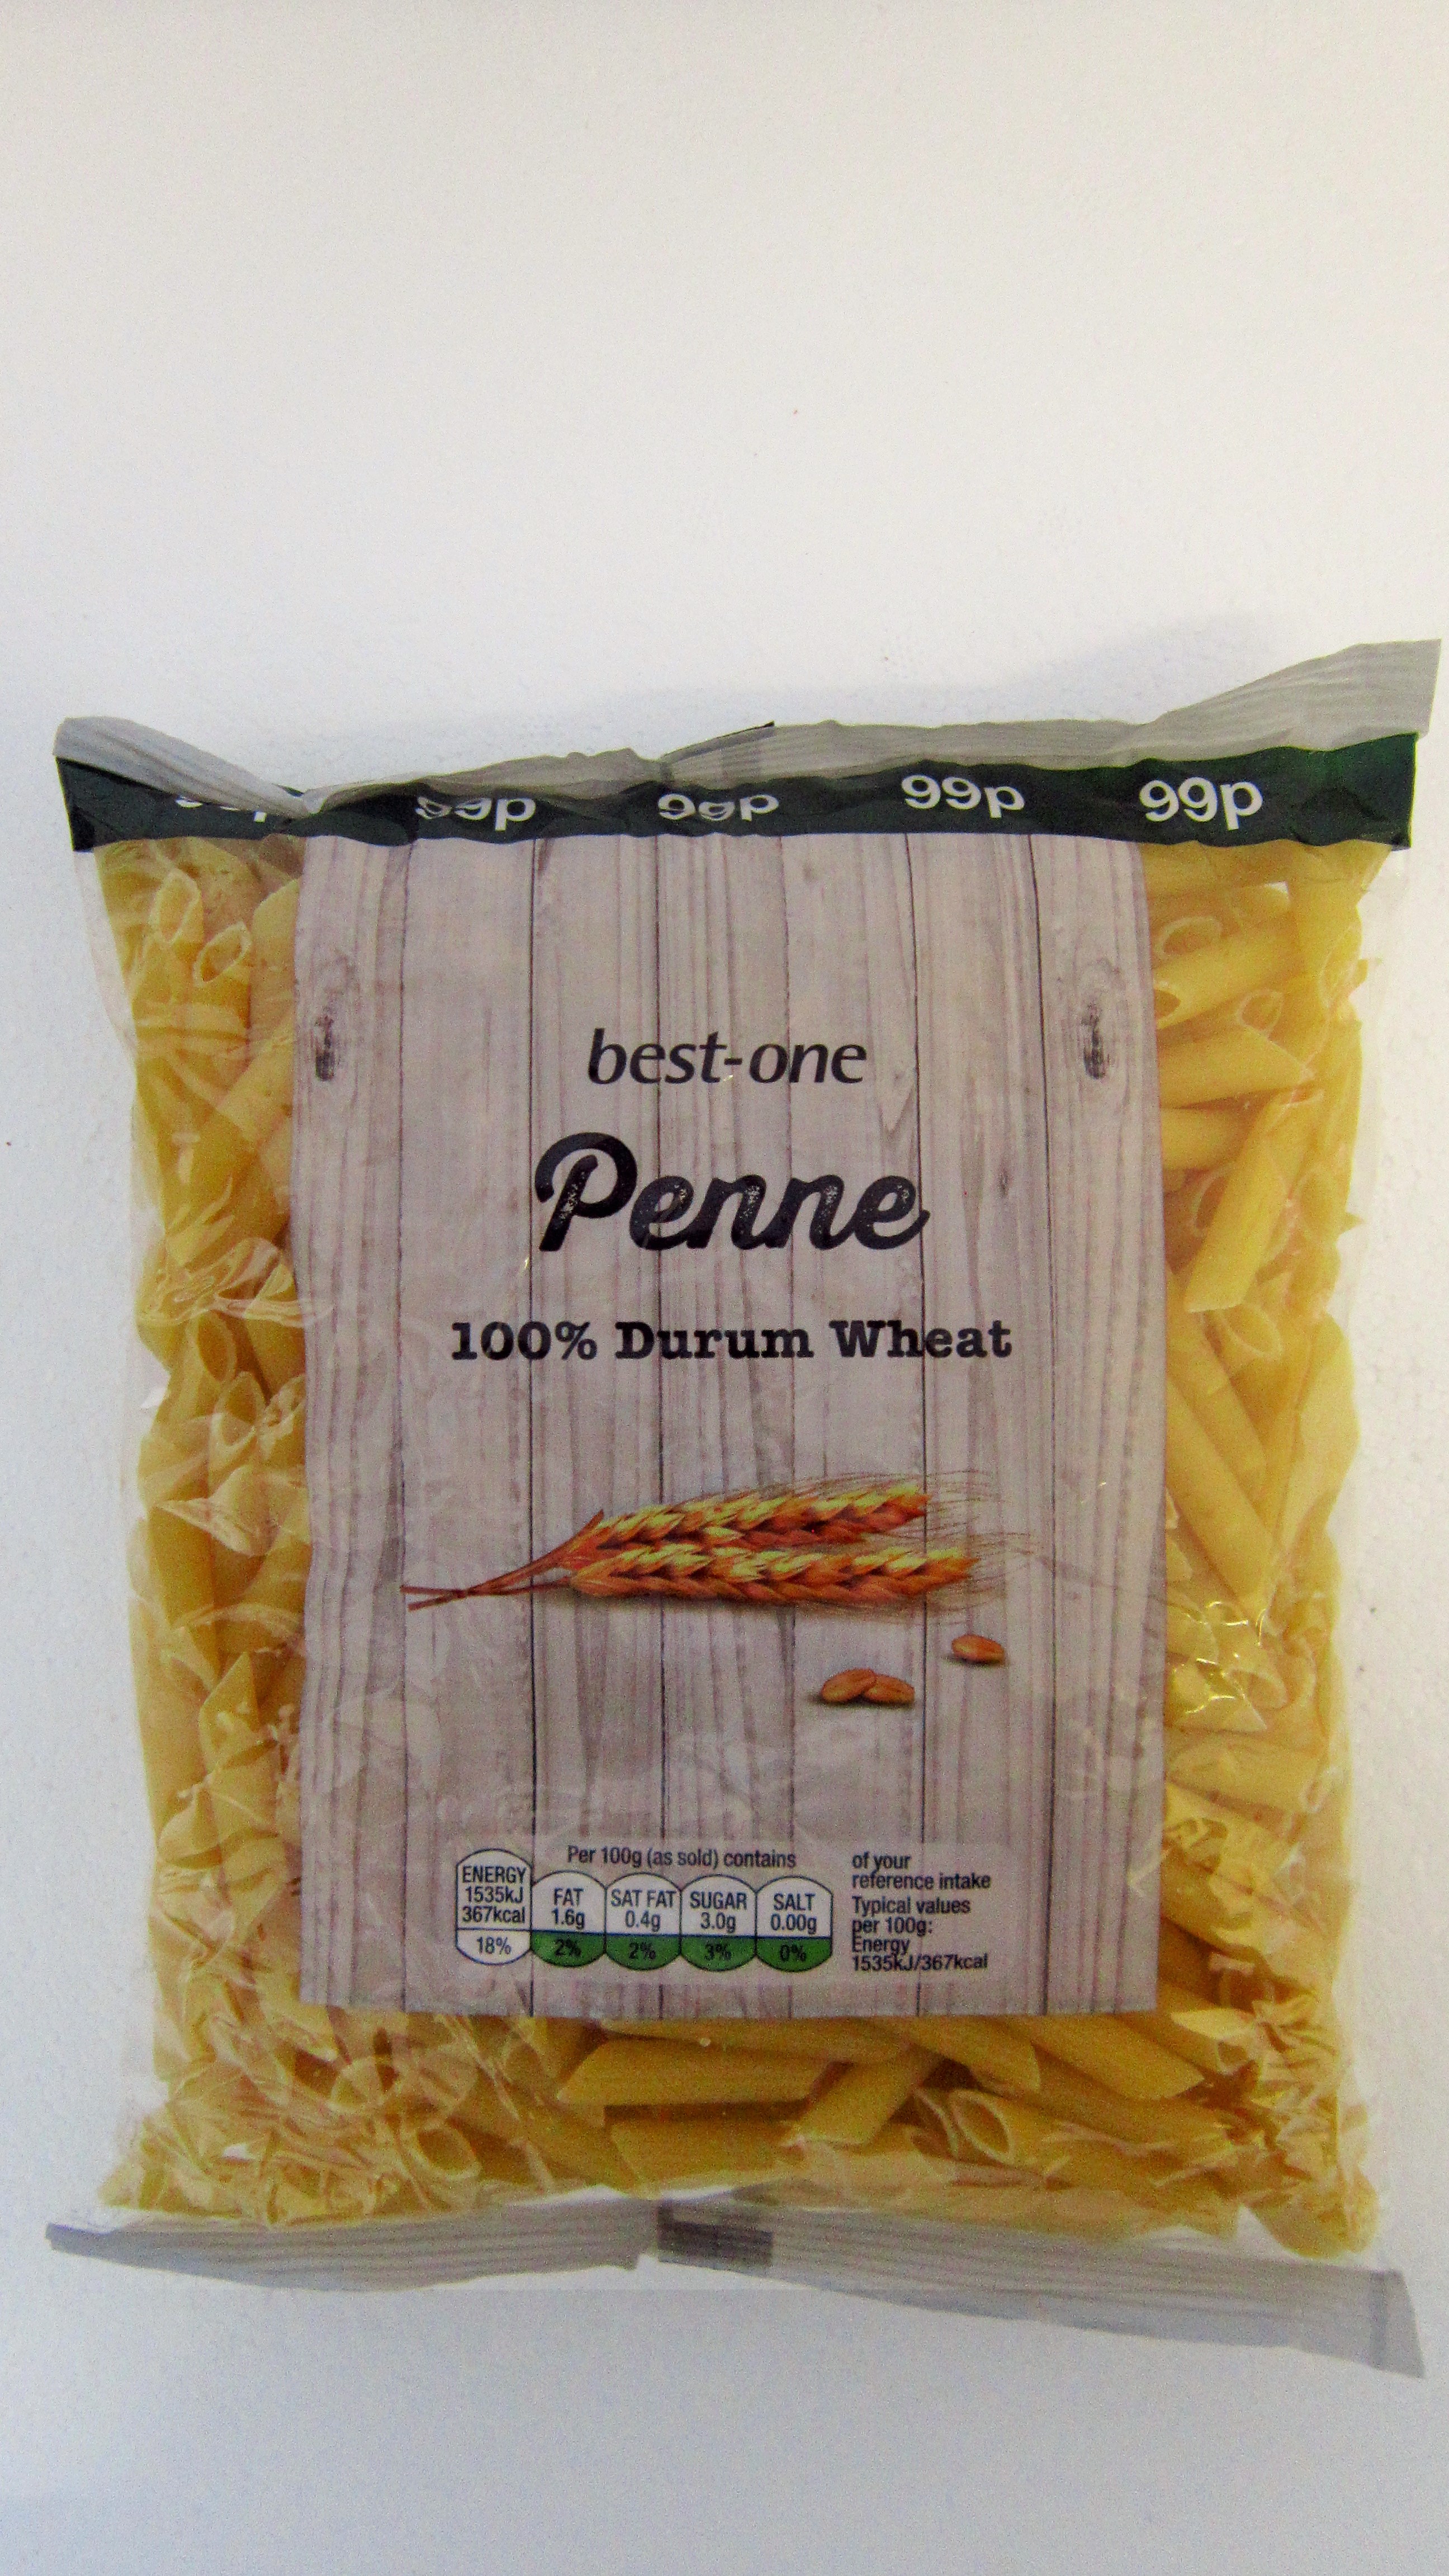 Best one- Penne Image